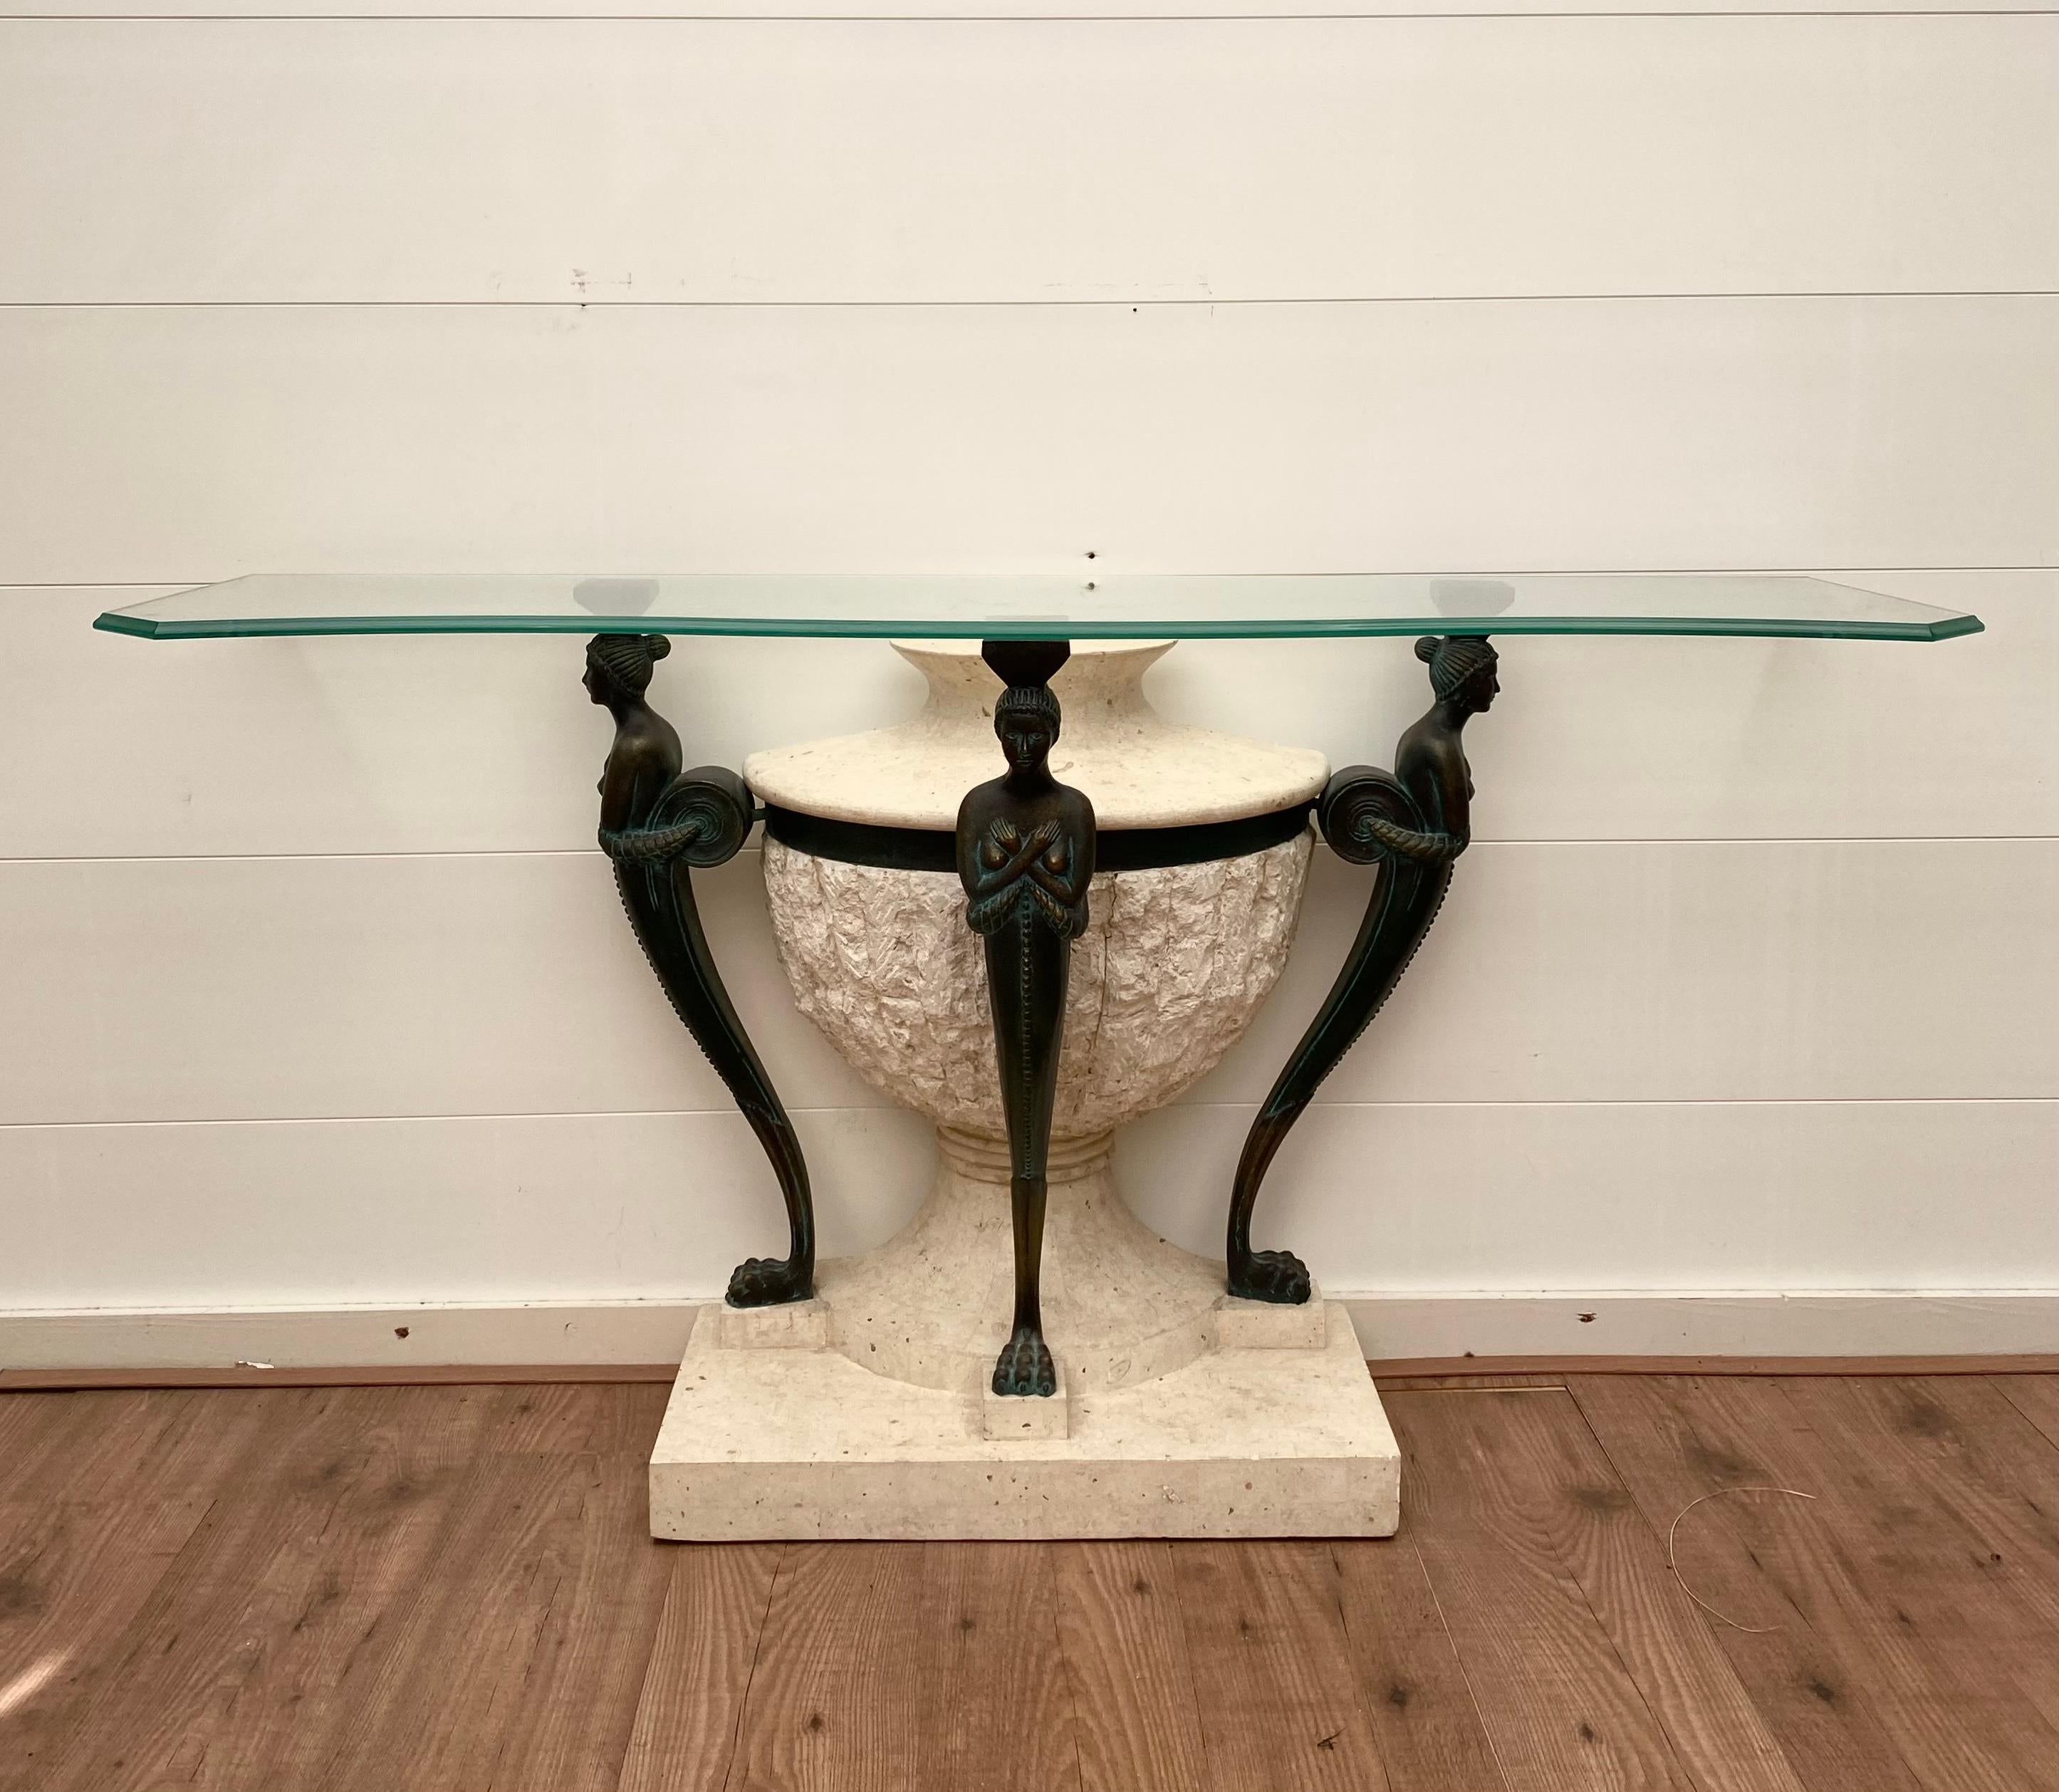 Gorgeous light weight Console table, featuring a cut Tempered glass top and synthetic/ fiber like base in Belgian Hard stone look with Bronze look ornaments. Looks absolutely real! Wear consistent with age and use, see: images. Labeled with a